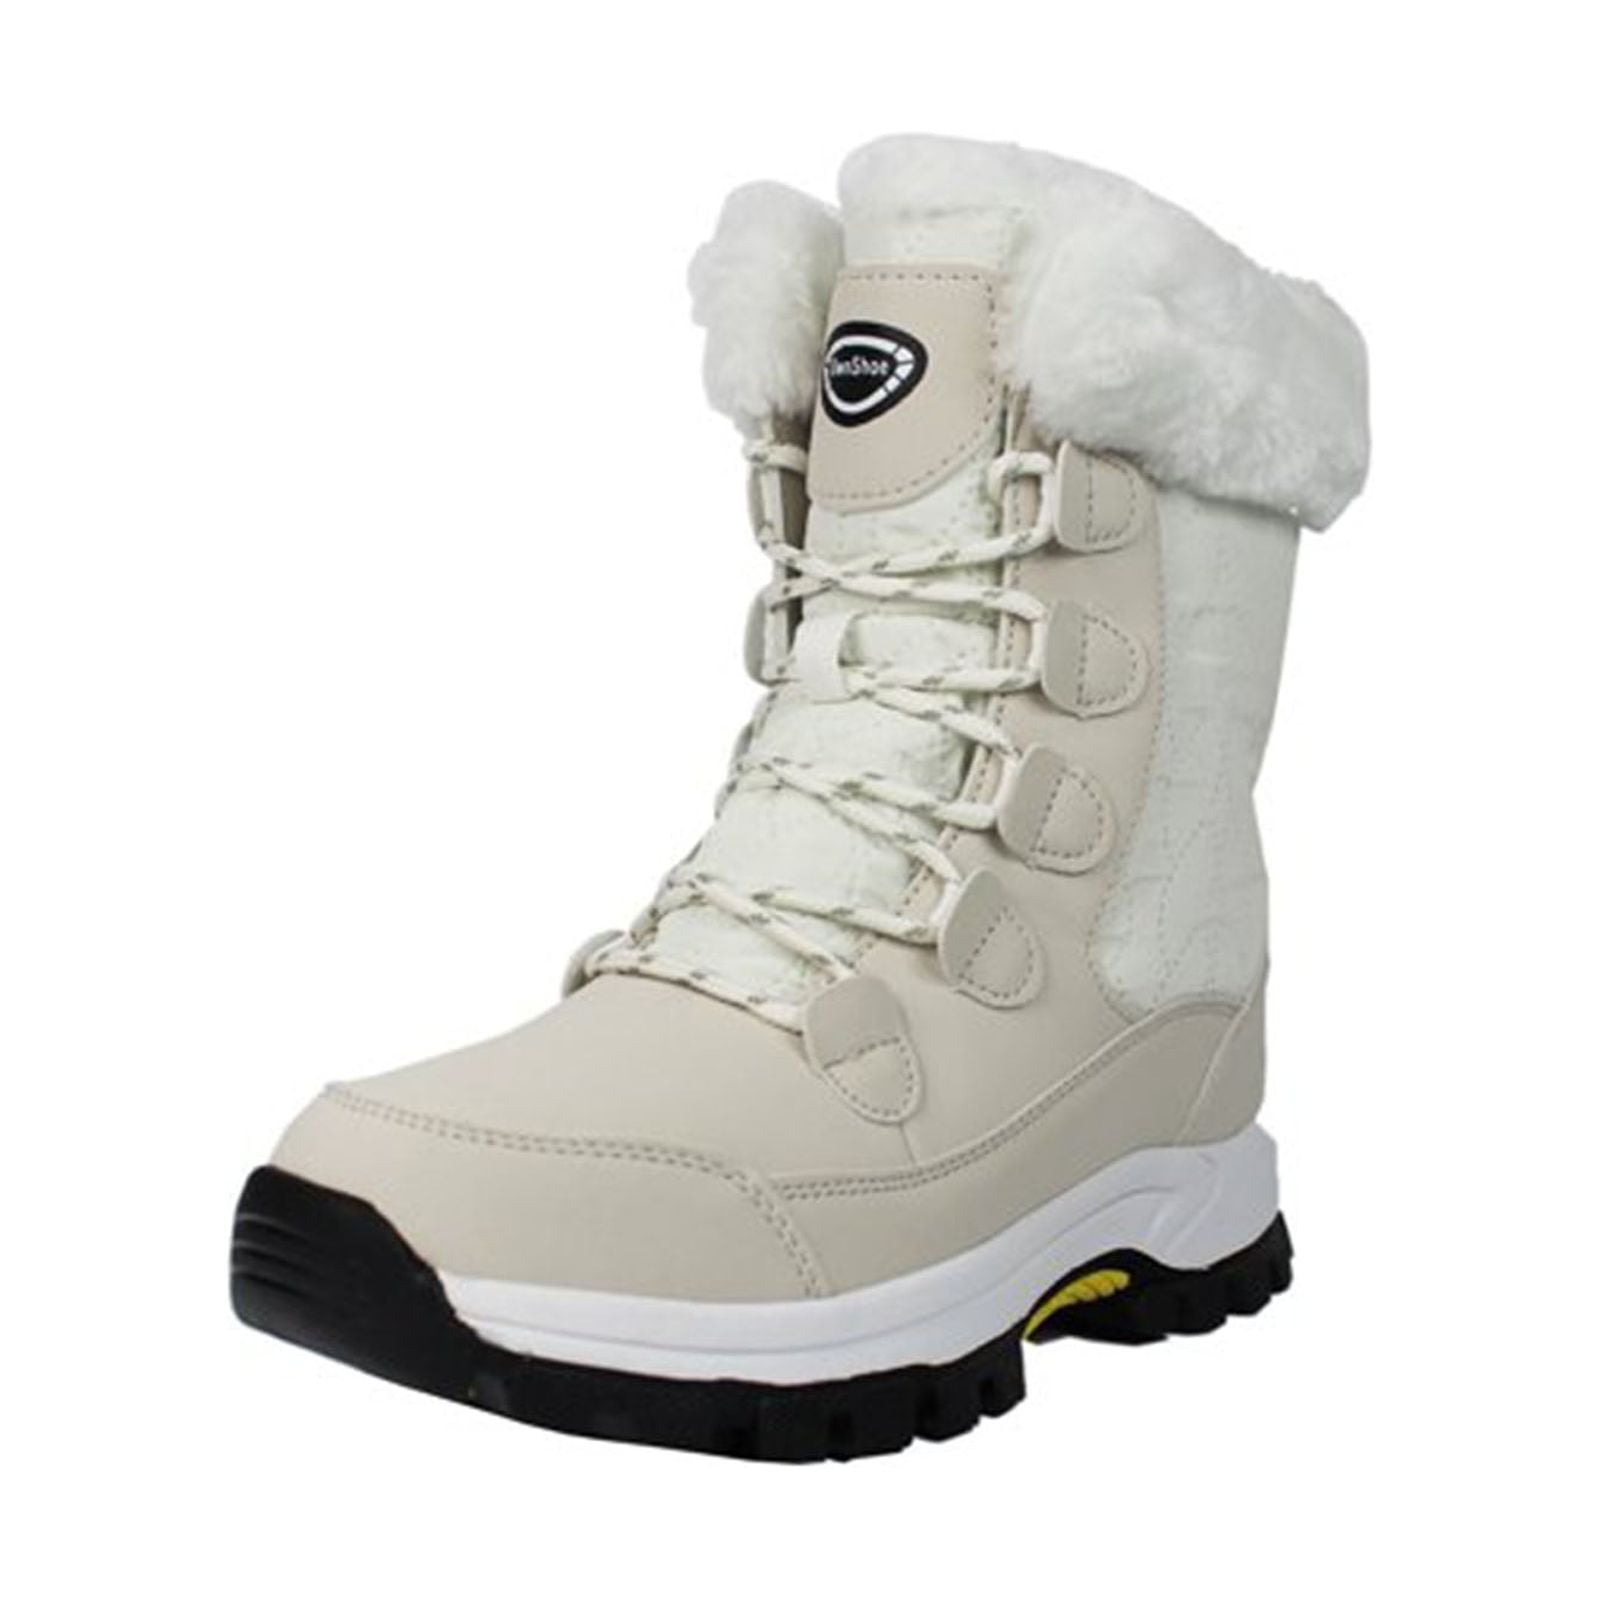 Winter Warm Snow Boots for Women Comfortable Outdoor Snow Shoes ...